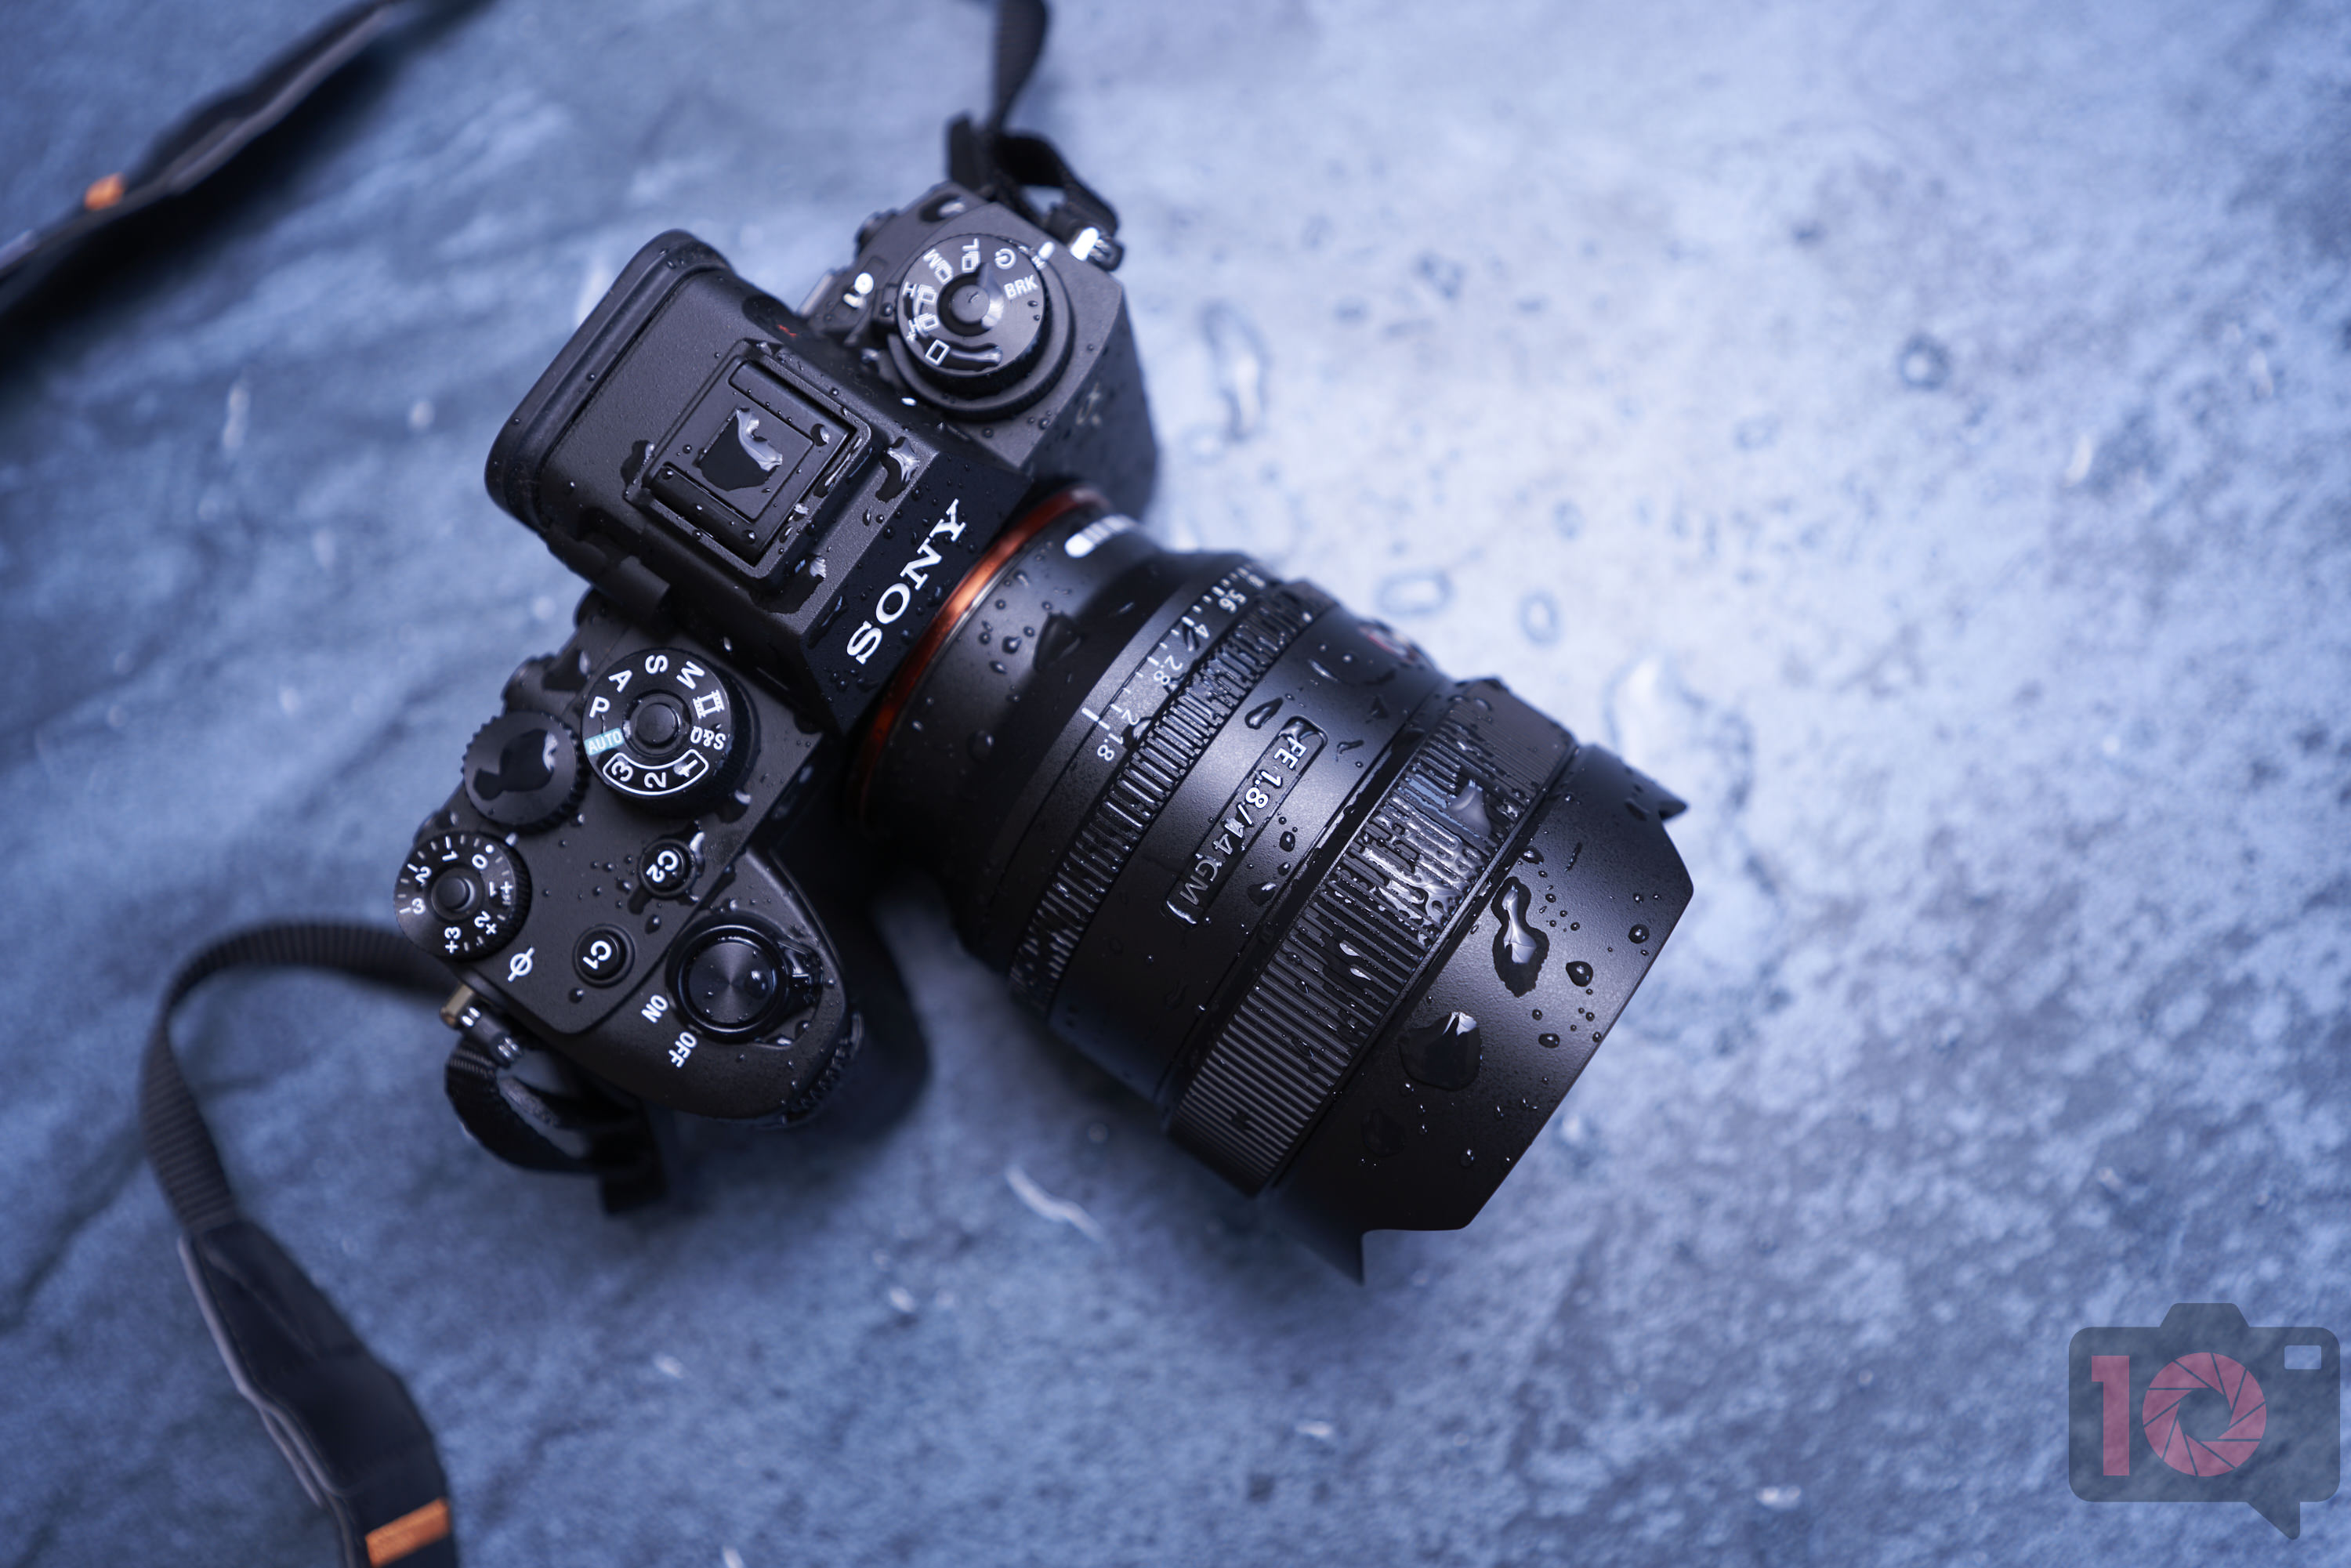 Chris Gampat The Phoblographer Sony 14mm f1.8 G Master revew product images 2.81-80s100 6